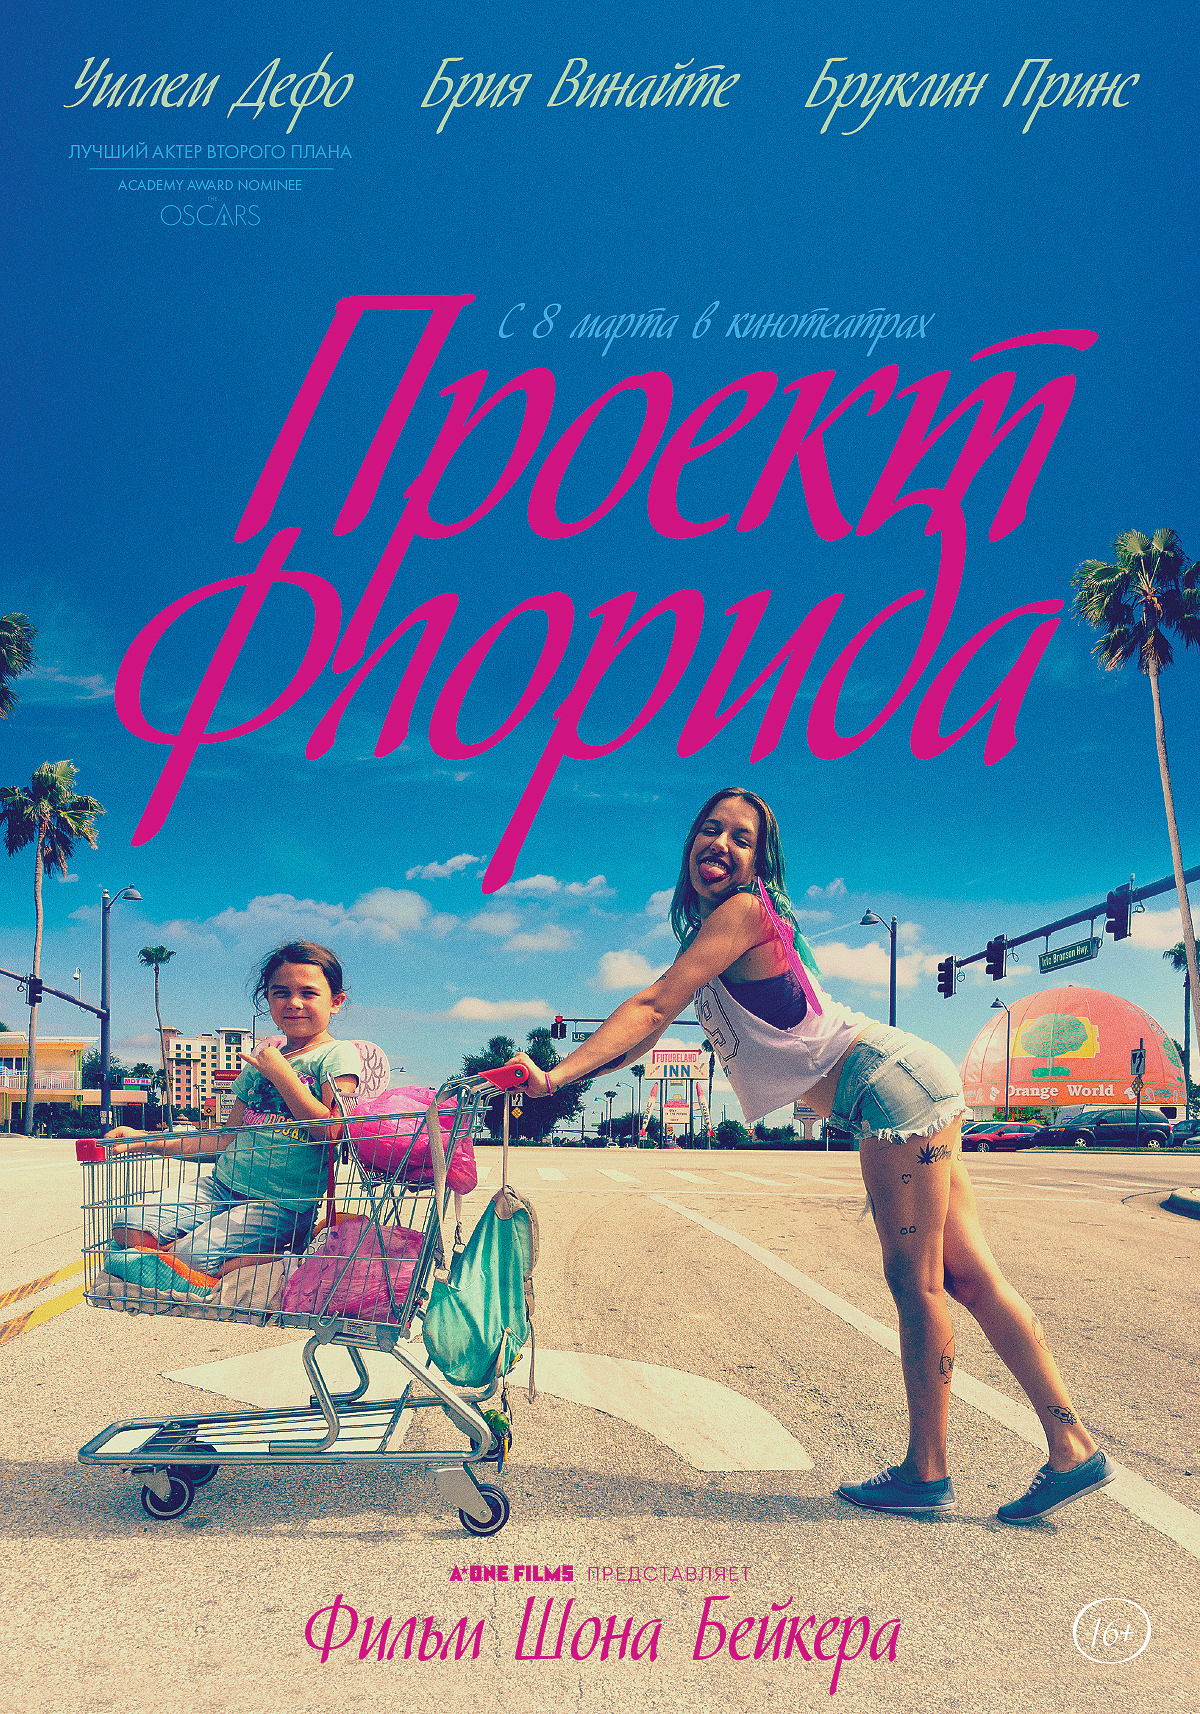 Project poster. Проект "Флорида" the Florida Project 2017,. Проект Флорида 2017 Постер.